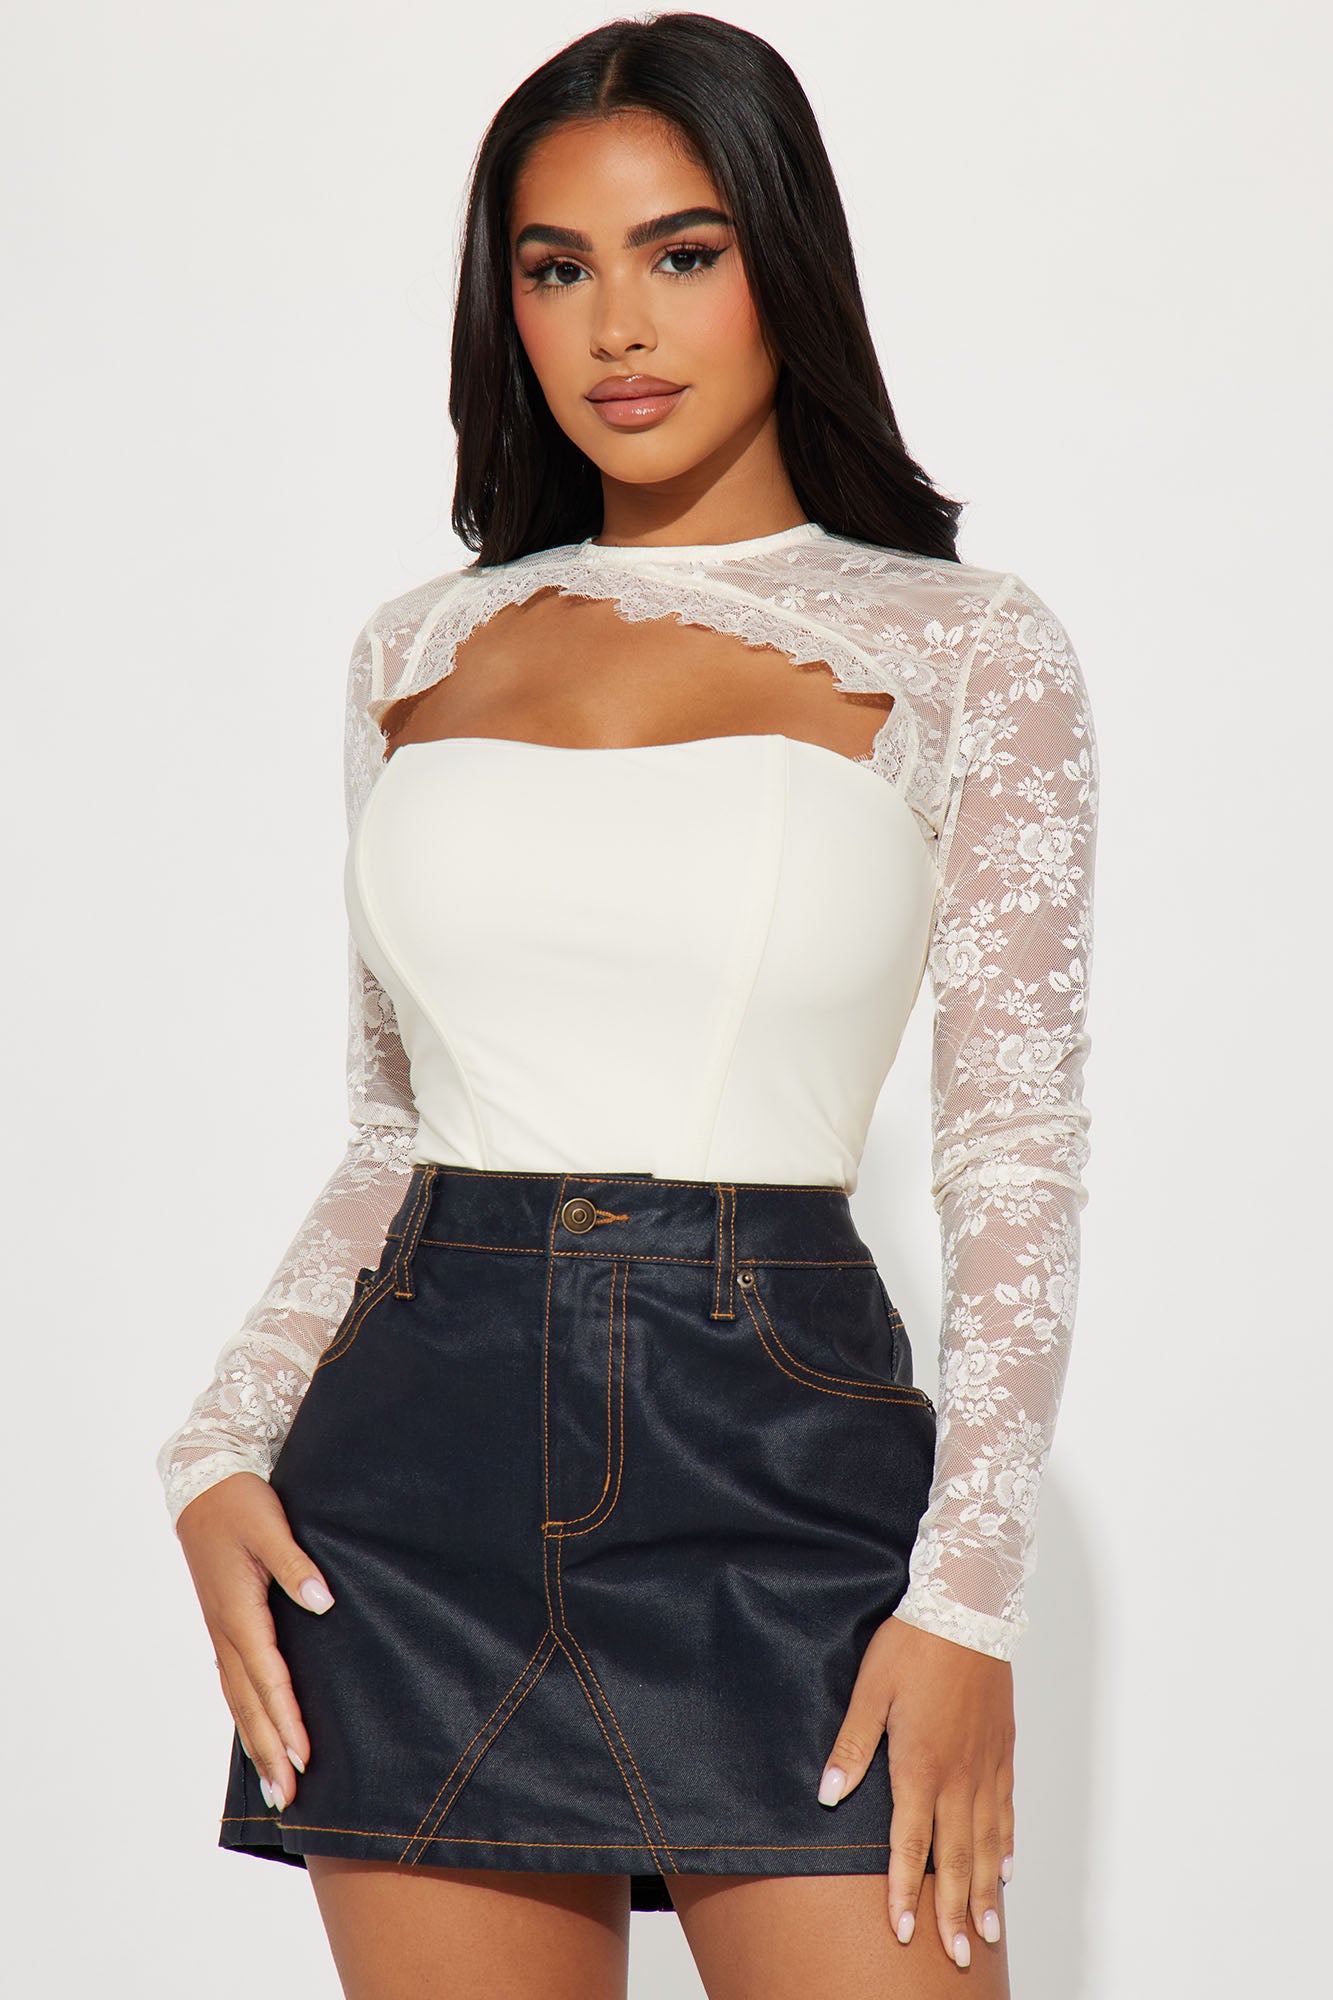 Women's Thriving With You Corset Top in Cream Size Small by Fashion Nova